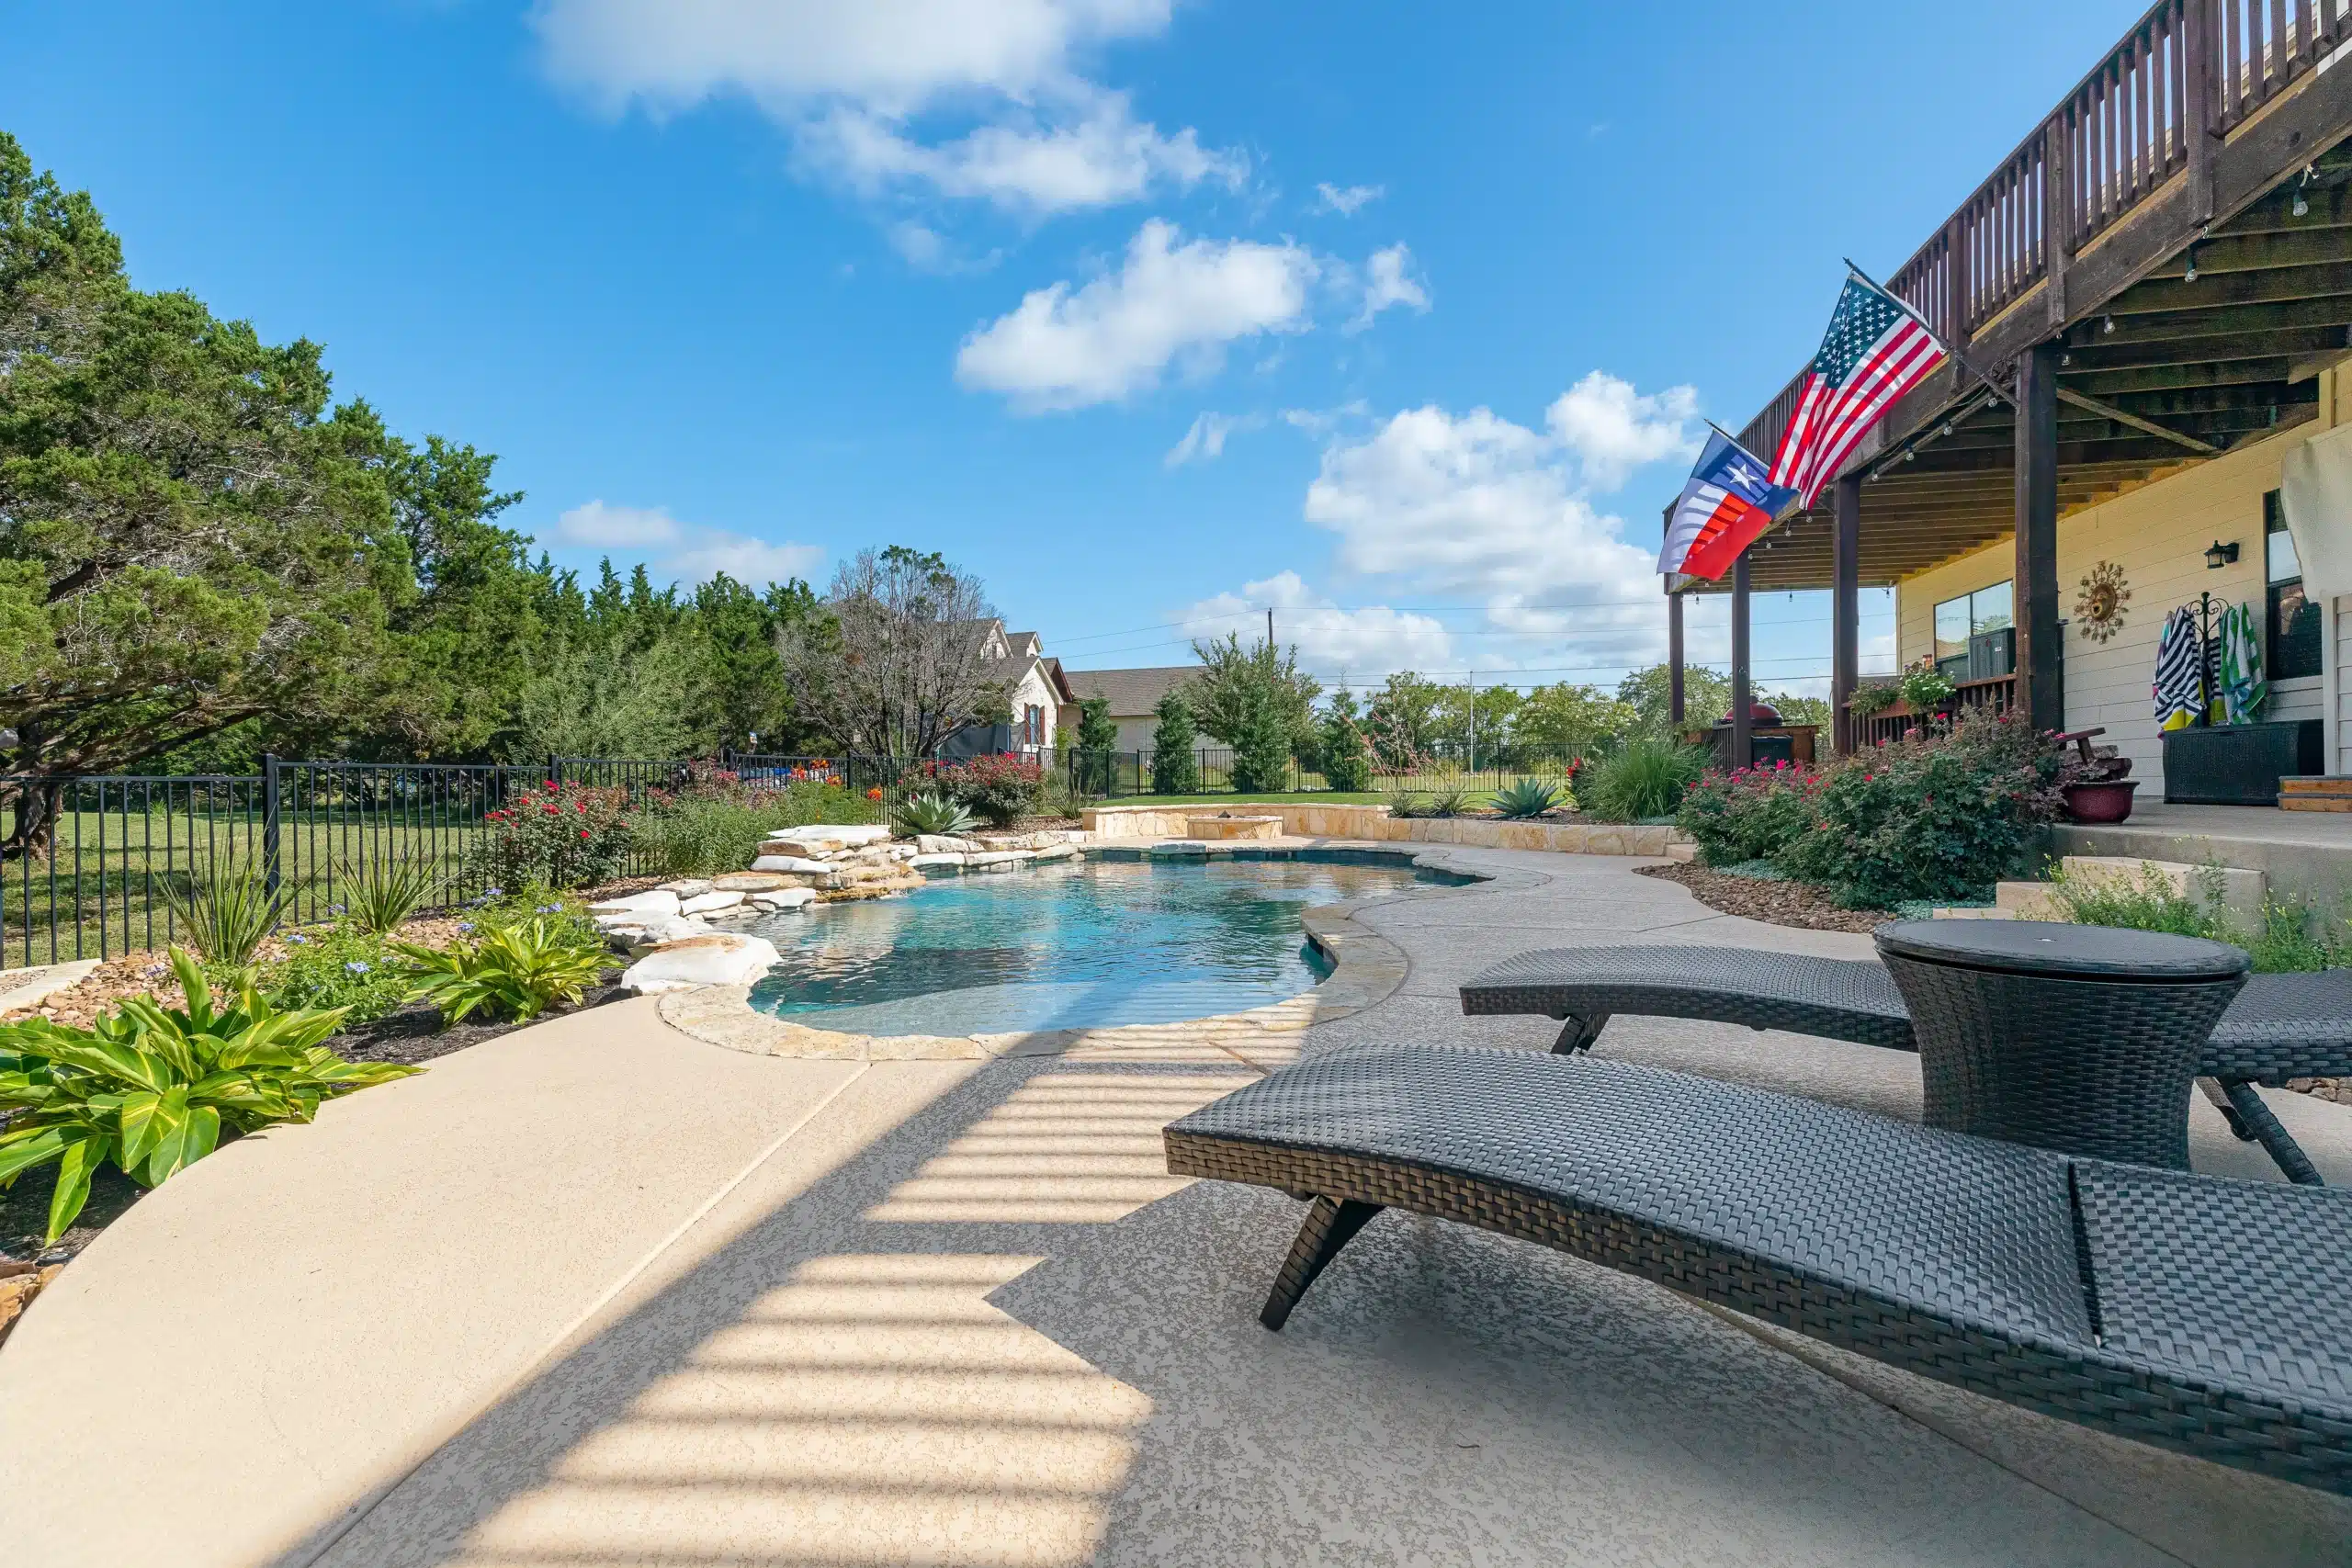 backyard with pool and lounge chairs behind two story home with deck adorned with texas and united states flags